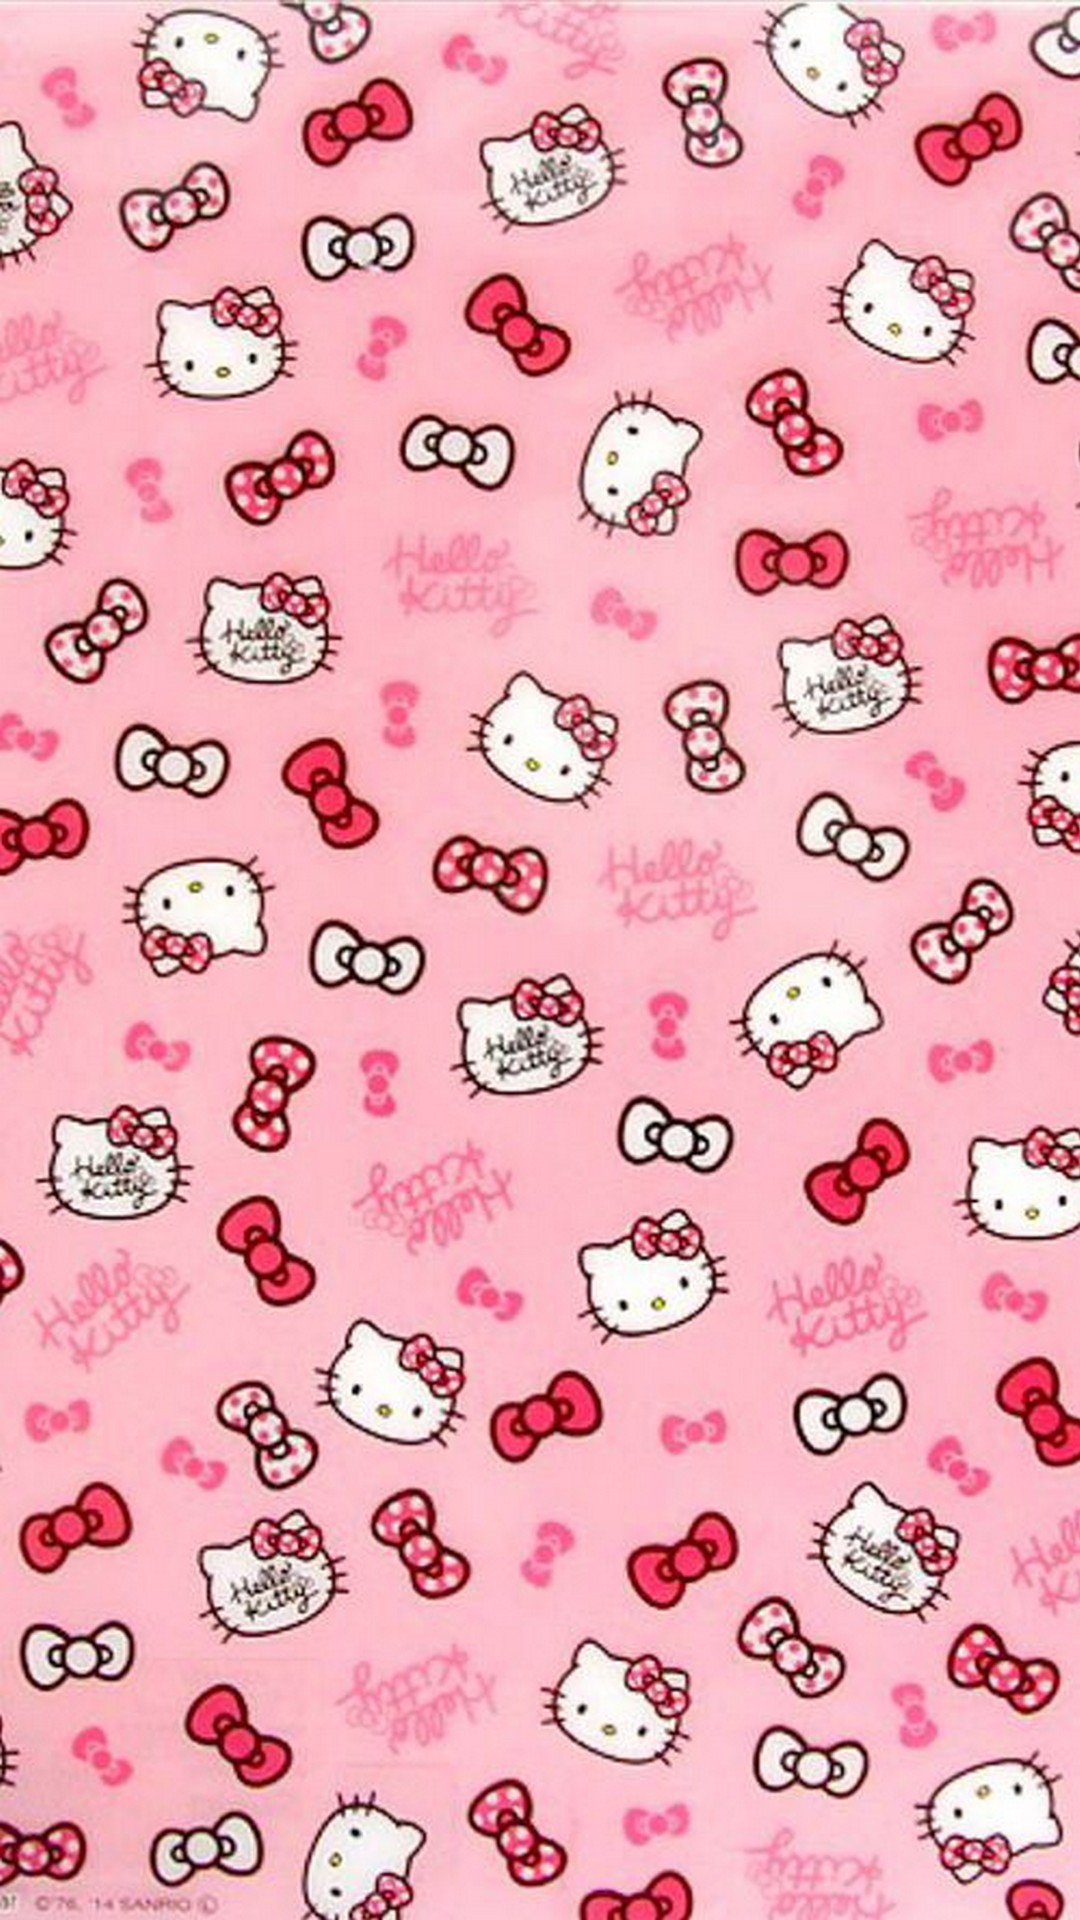 Hello Kitty Pictures Wallpaper iPhone HD with resolution 1080X1920 pixel. You can use this wallpaper as background for your desktop Computer Screensavers, Android or iPhone smartphones